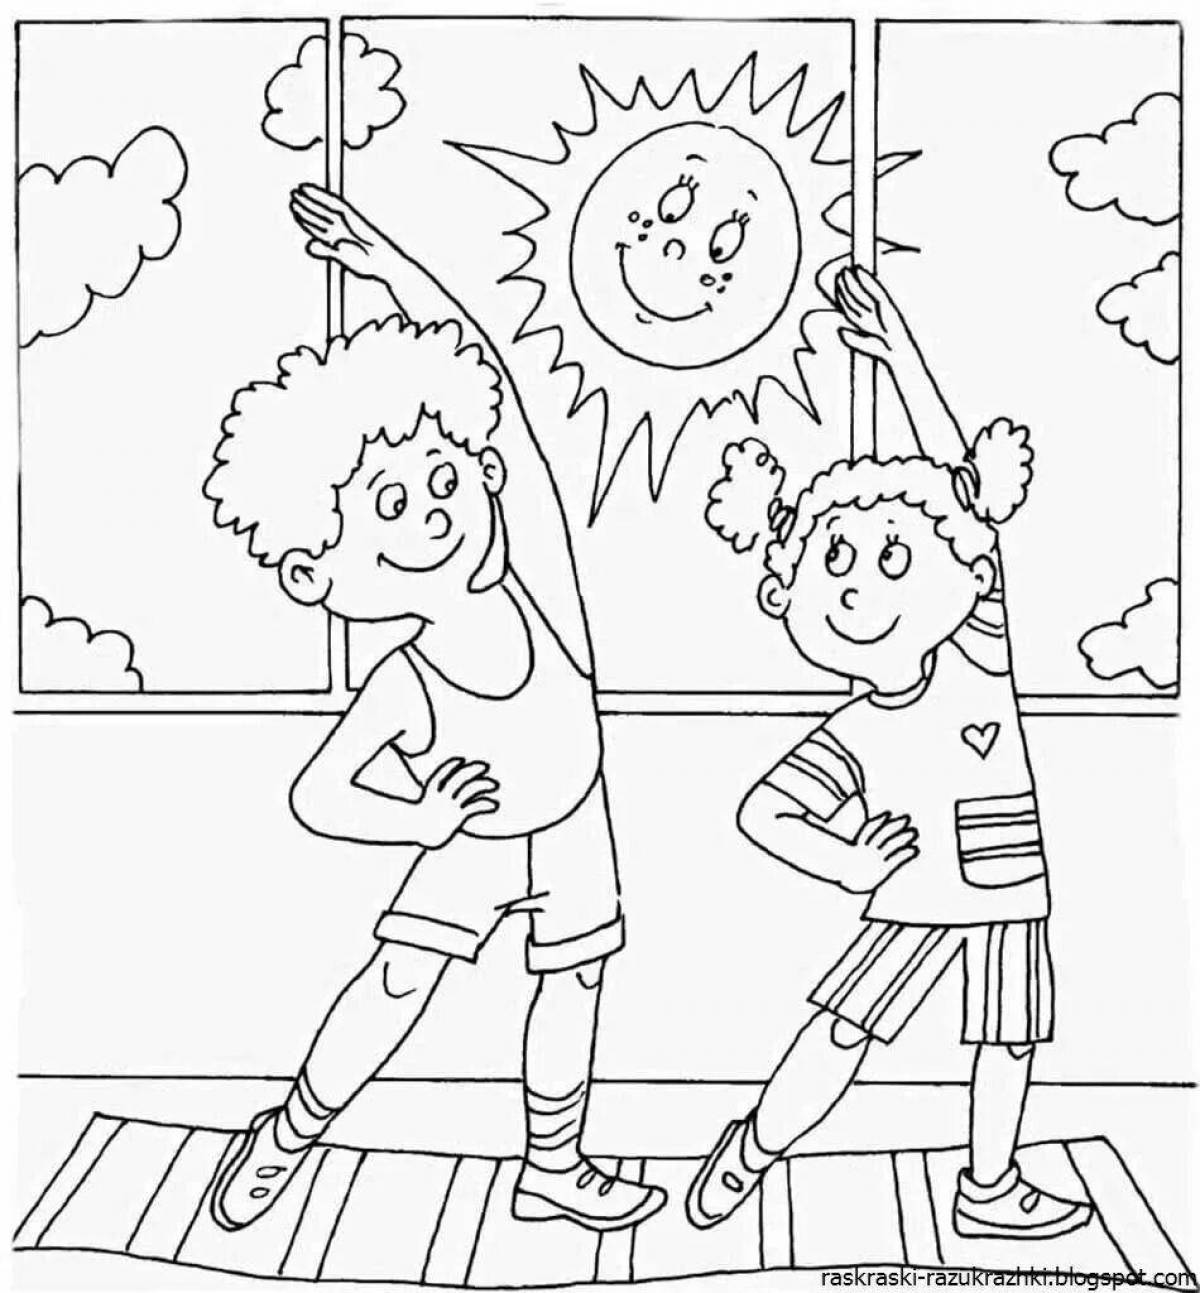 Bright coloring page healthy lifestyle grade 3